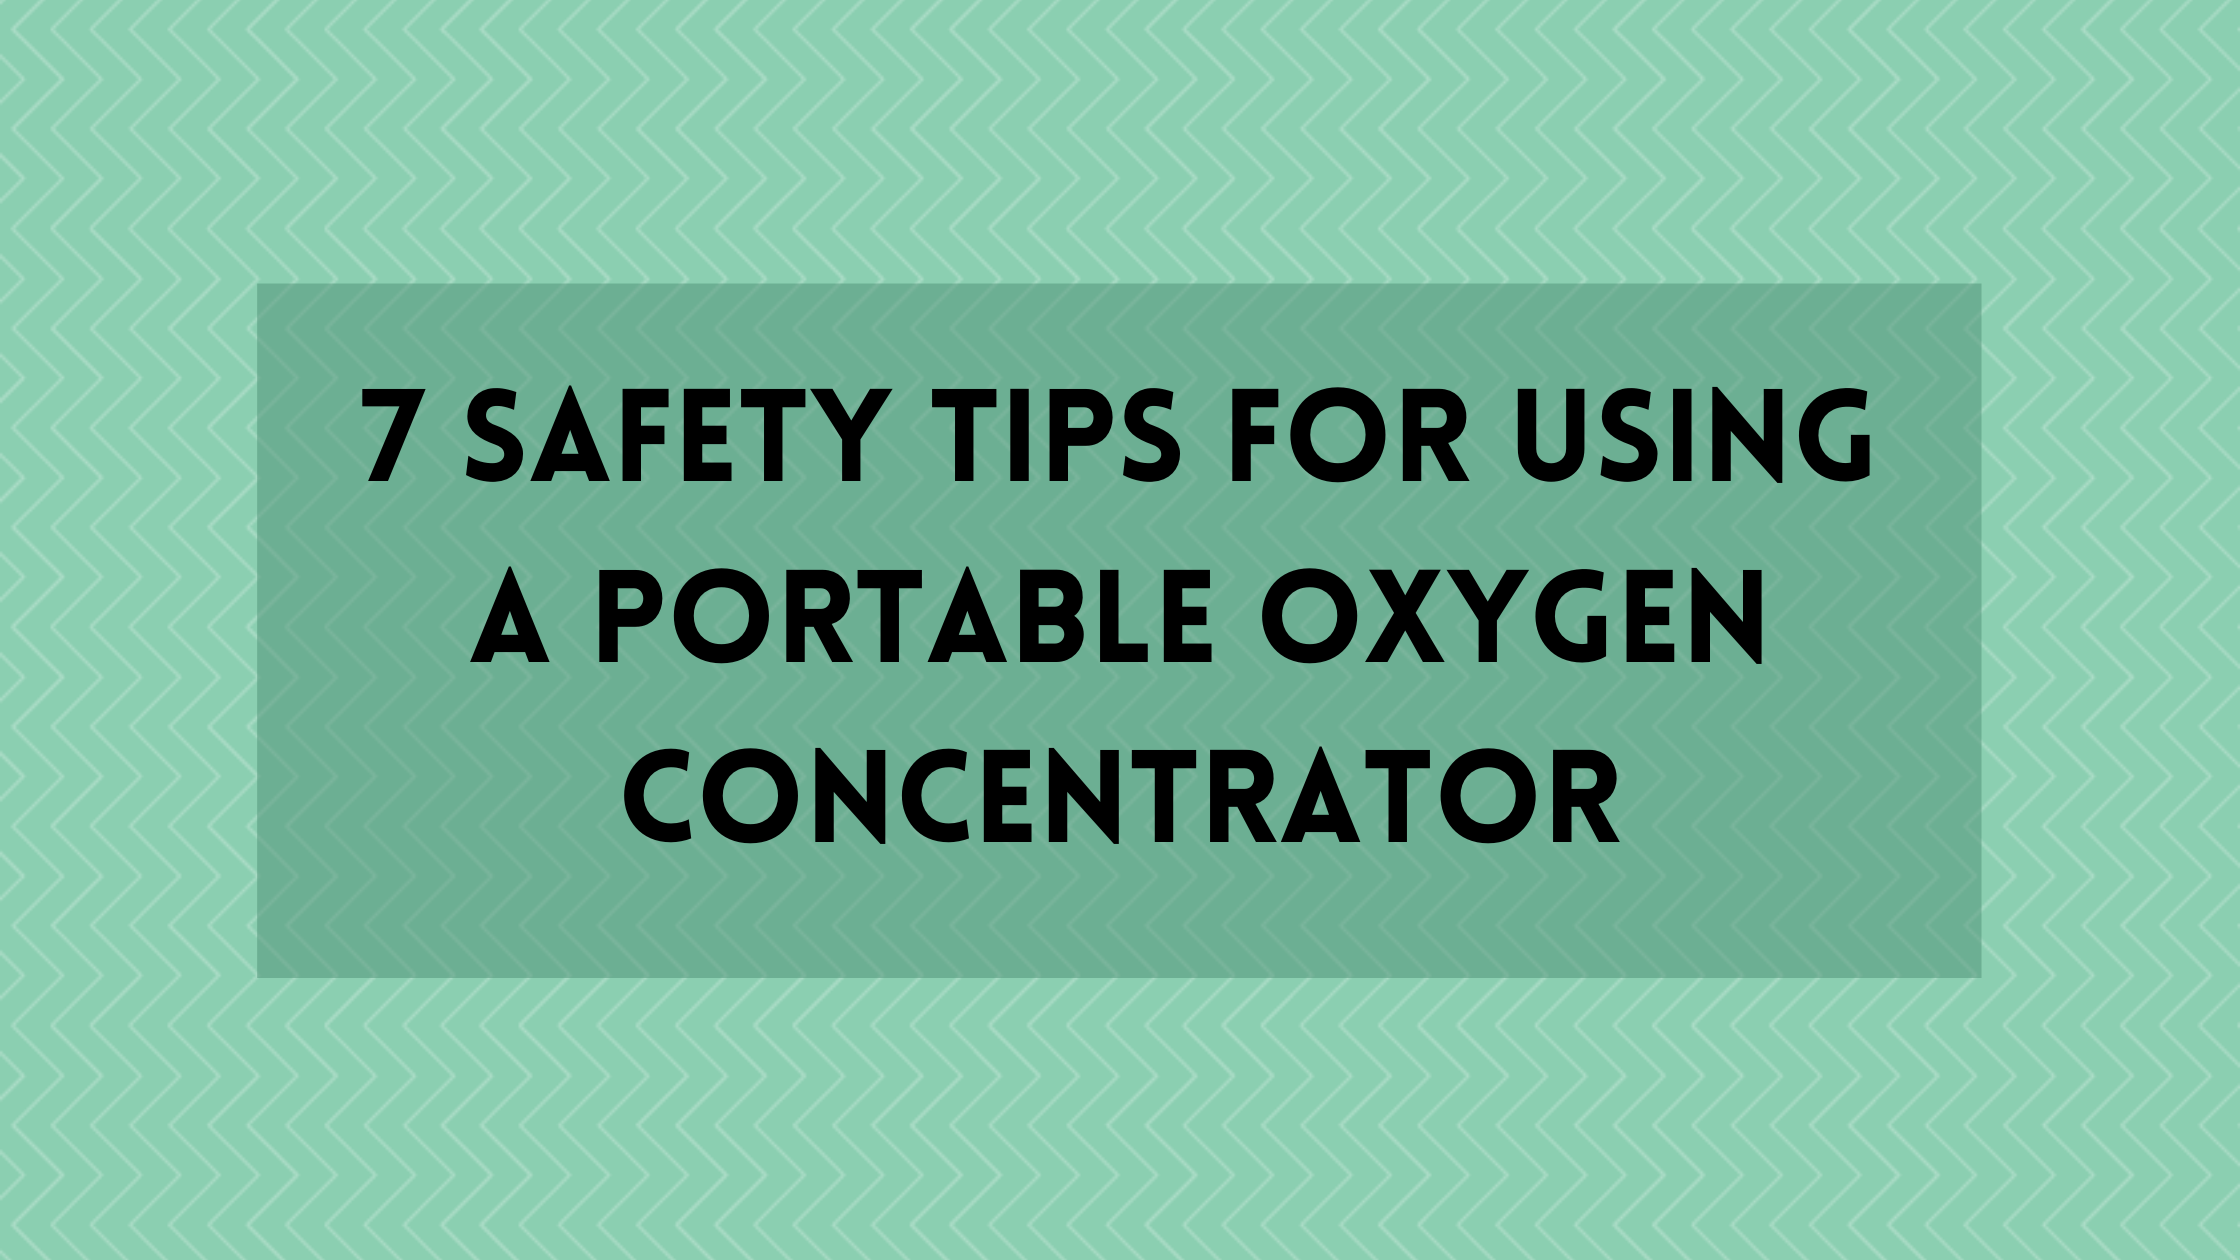 7 Safety Tips for Using a Portable Oxygen Concentrator